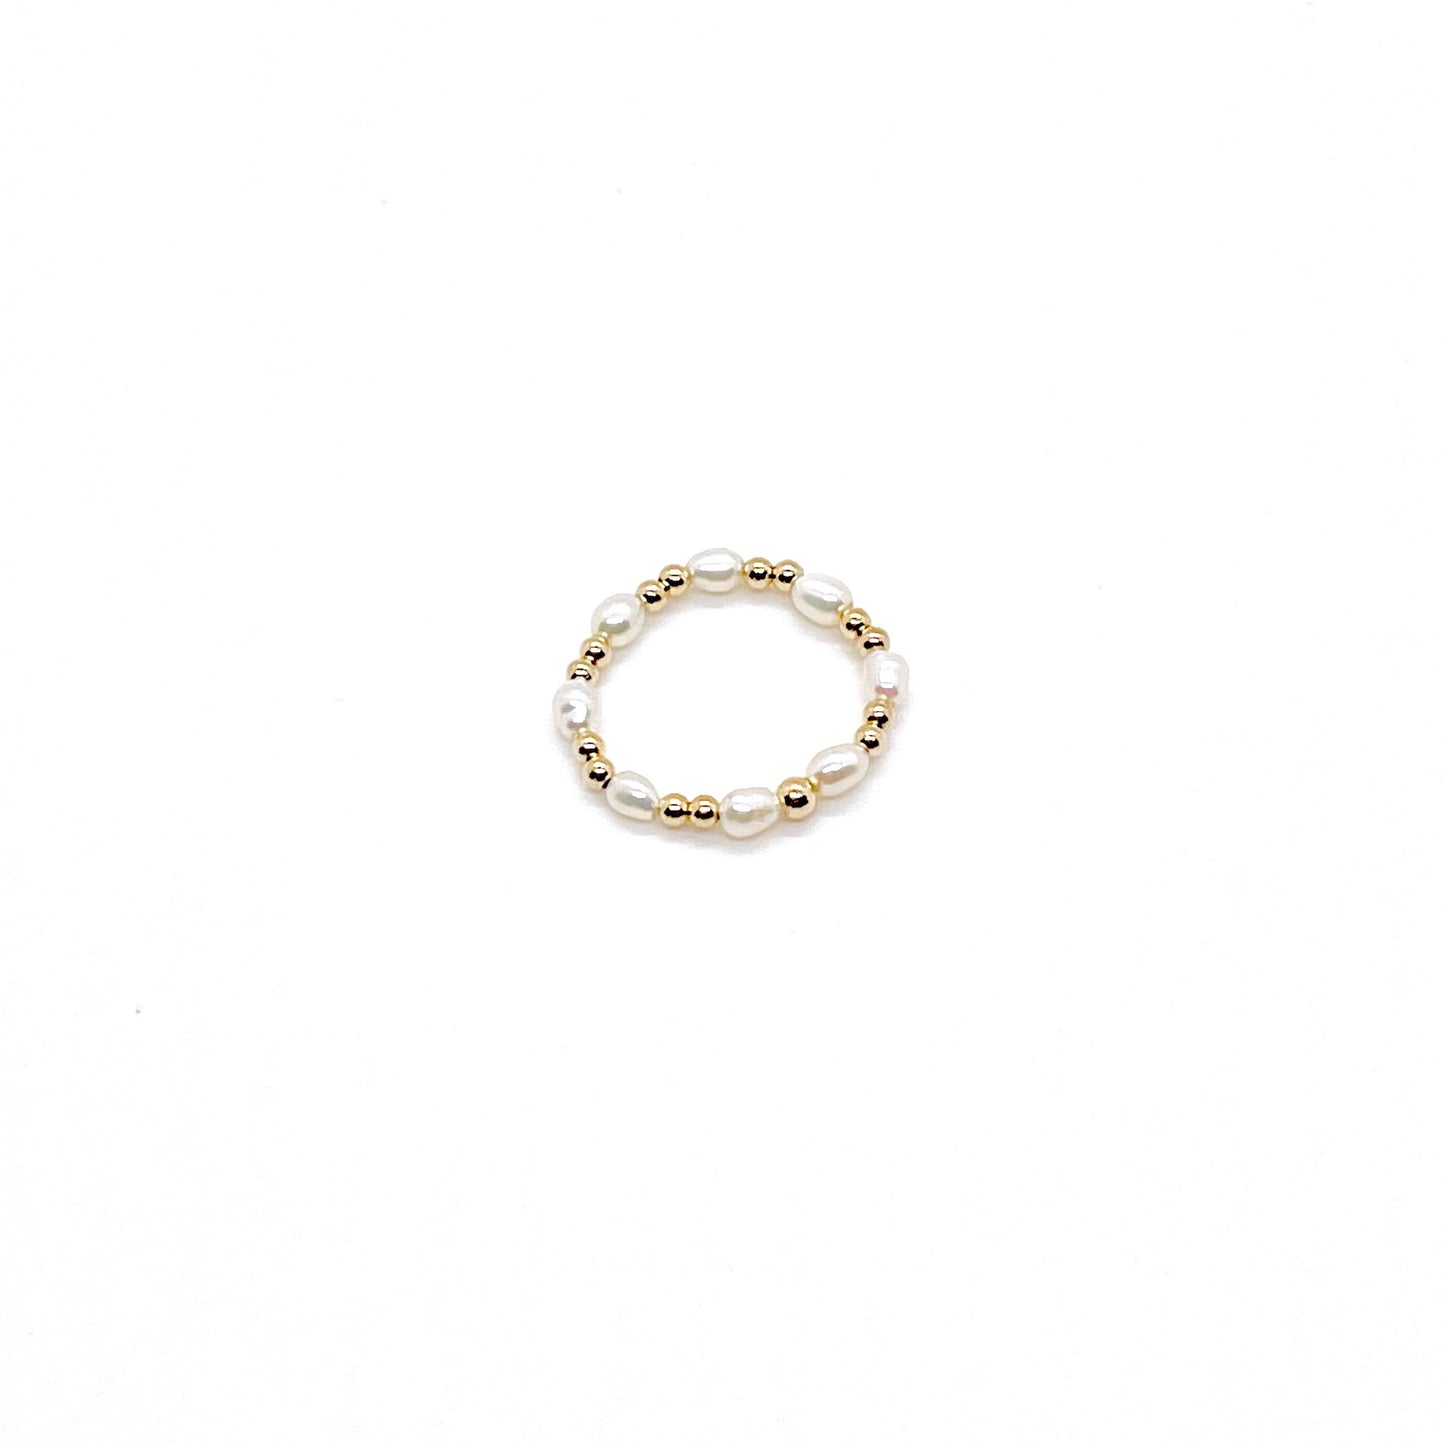 Freshwater pearl ring with rice pearls and alternating 2mm 14K gold filled beads on a stretch cord.